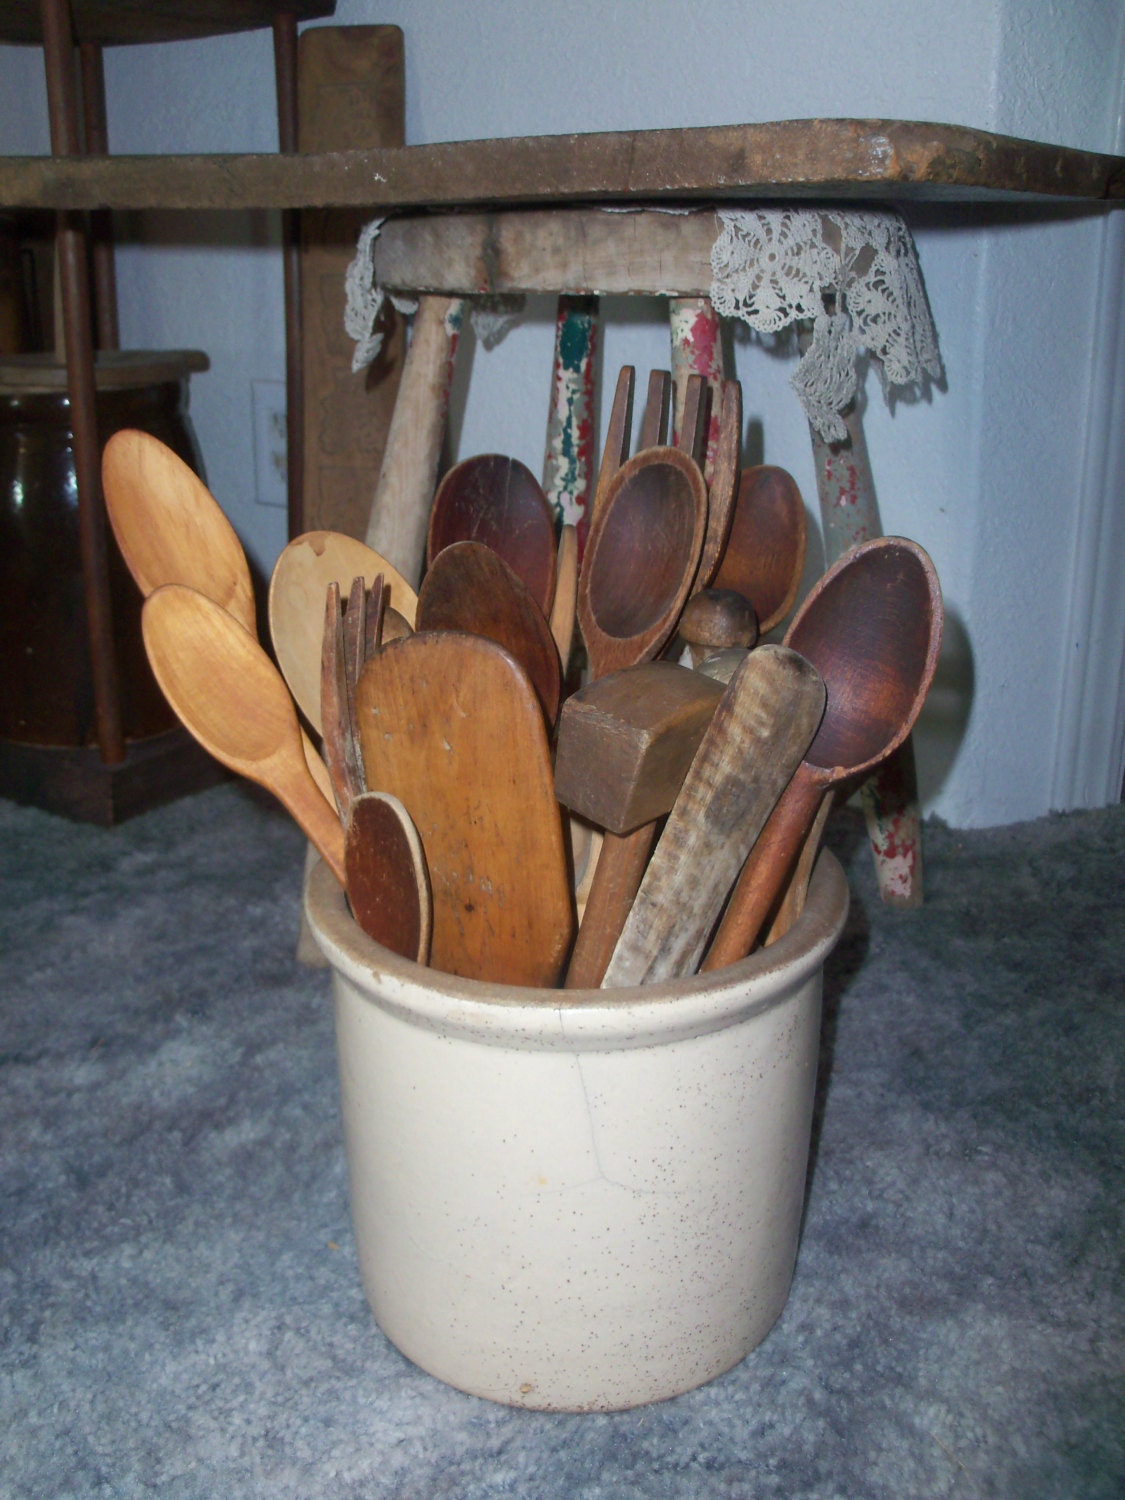 Large lot of 23 antique wooden kitchen utensils with old crock, old spoons,butter paddles,mashers and more - BLUEMOONPRIMITIVES1